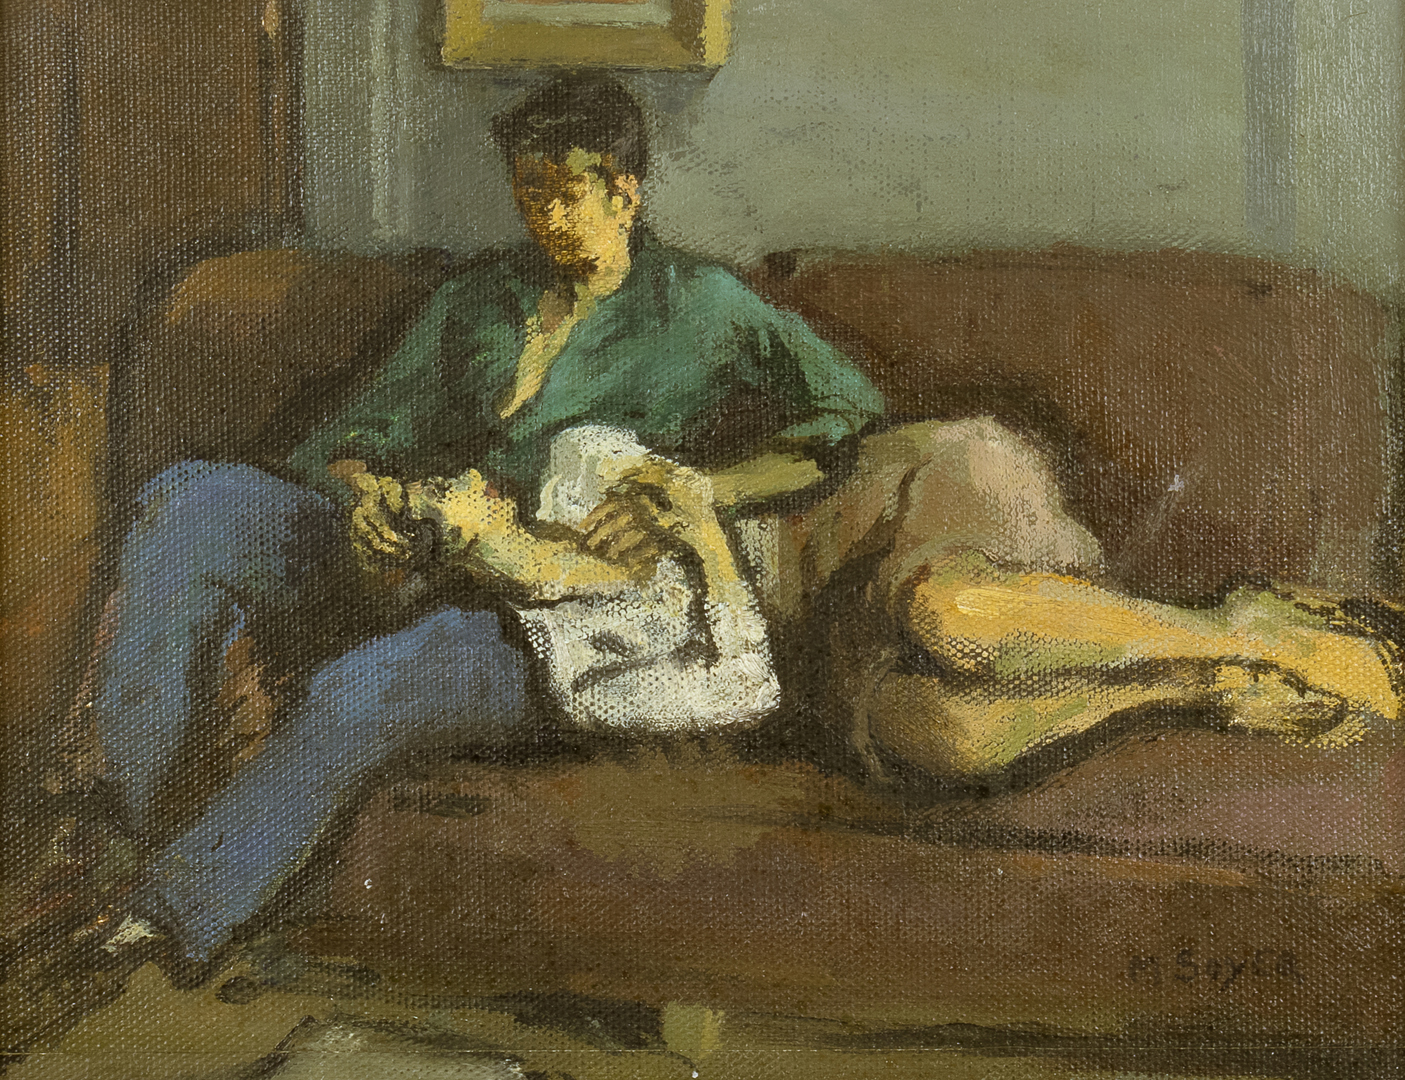 MOSES SOYER 1899 1974 UNTITLED 2fb0c89